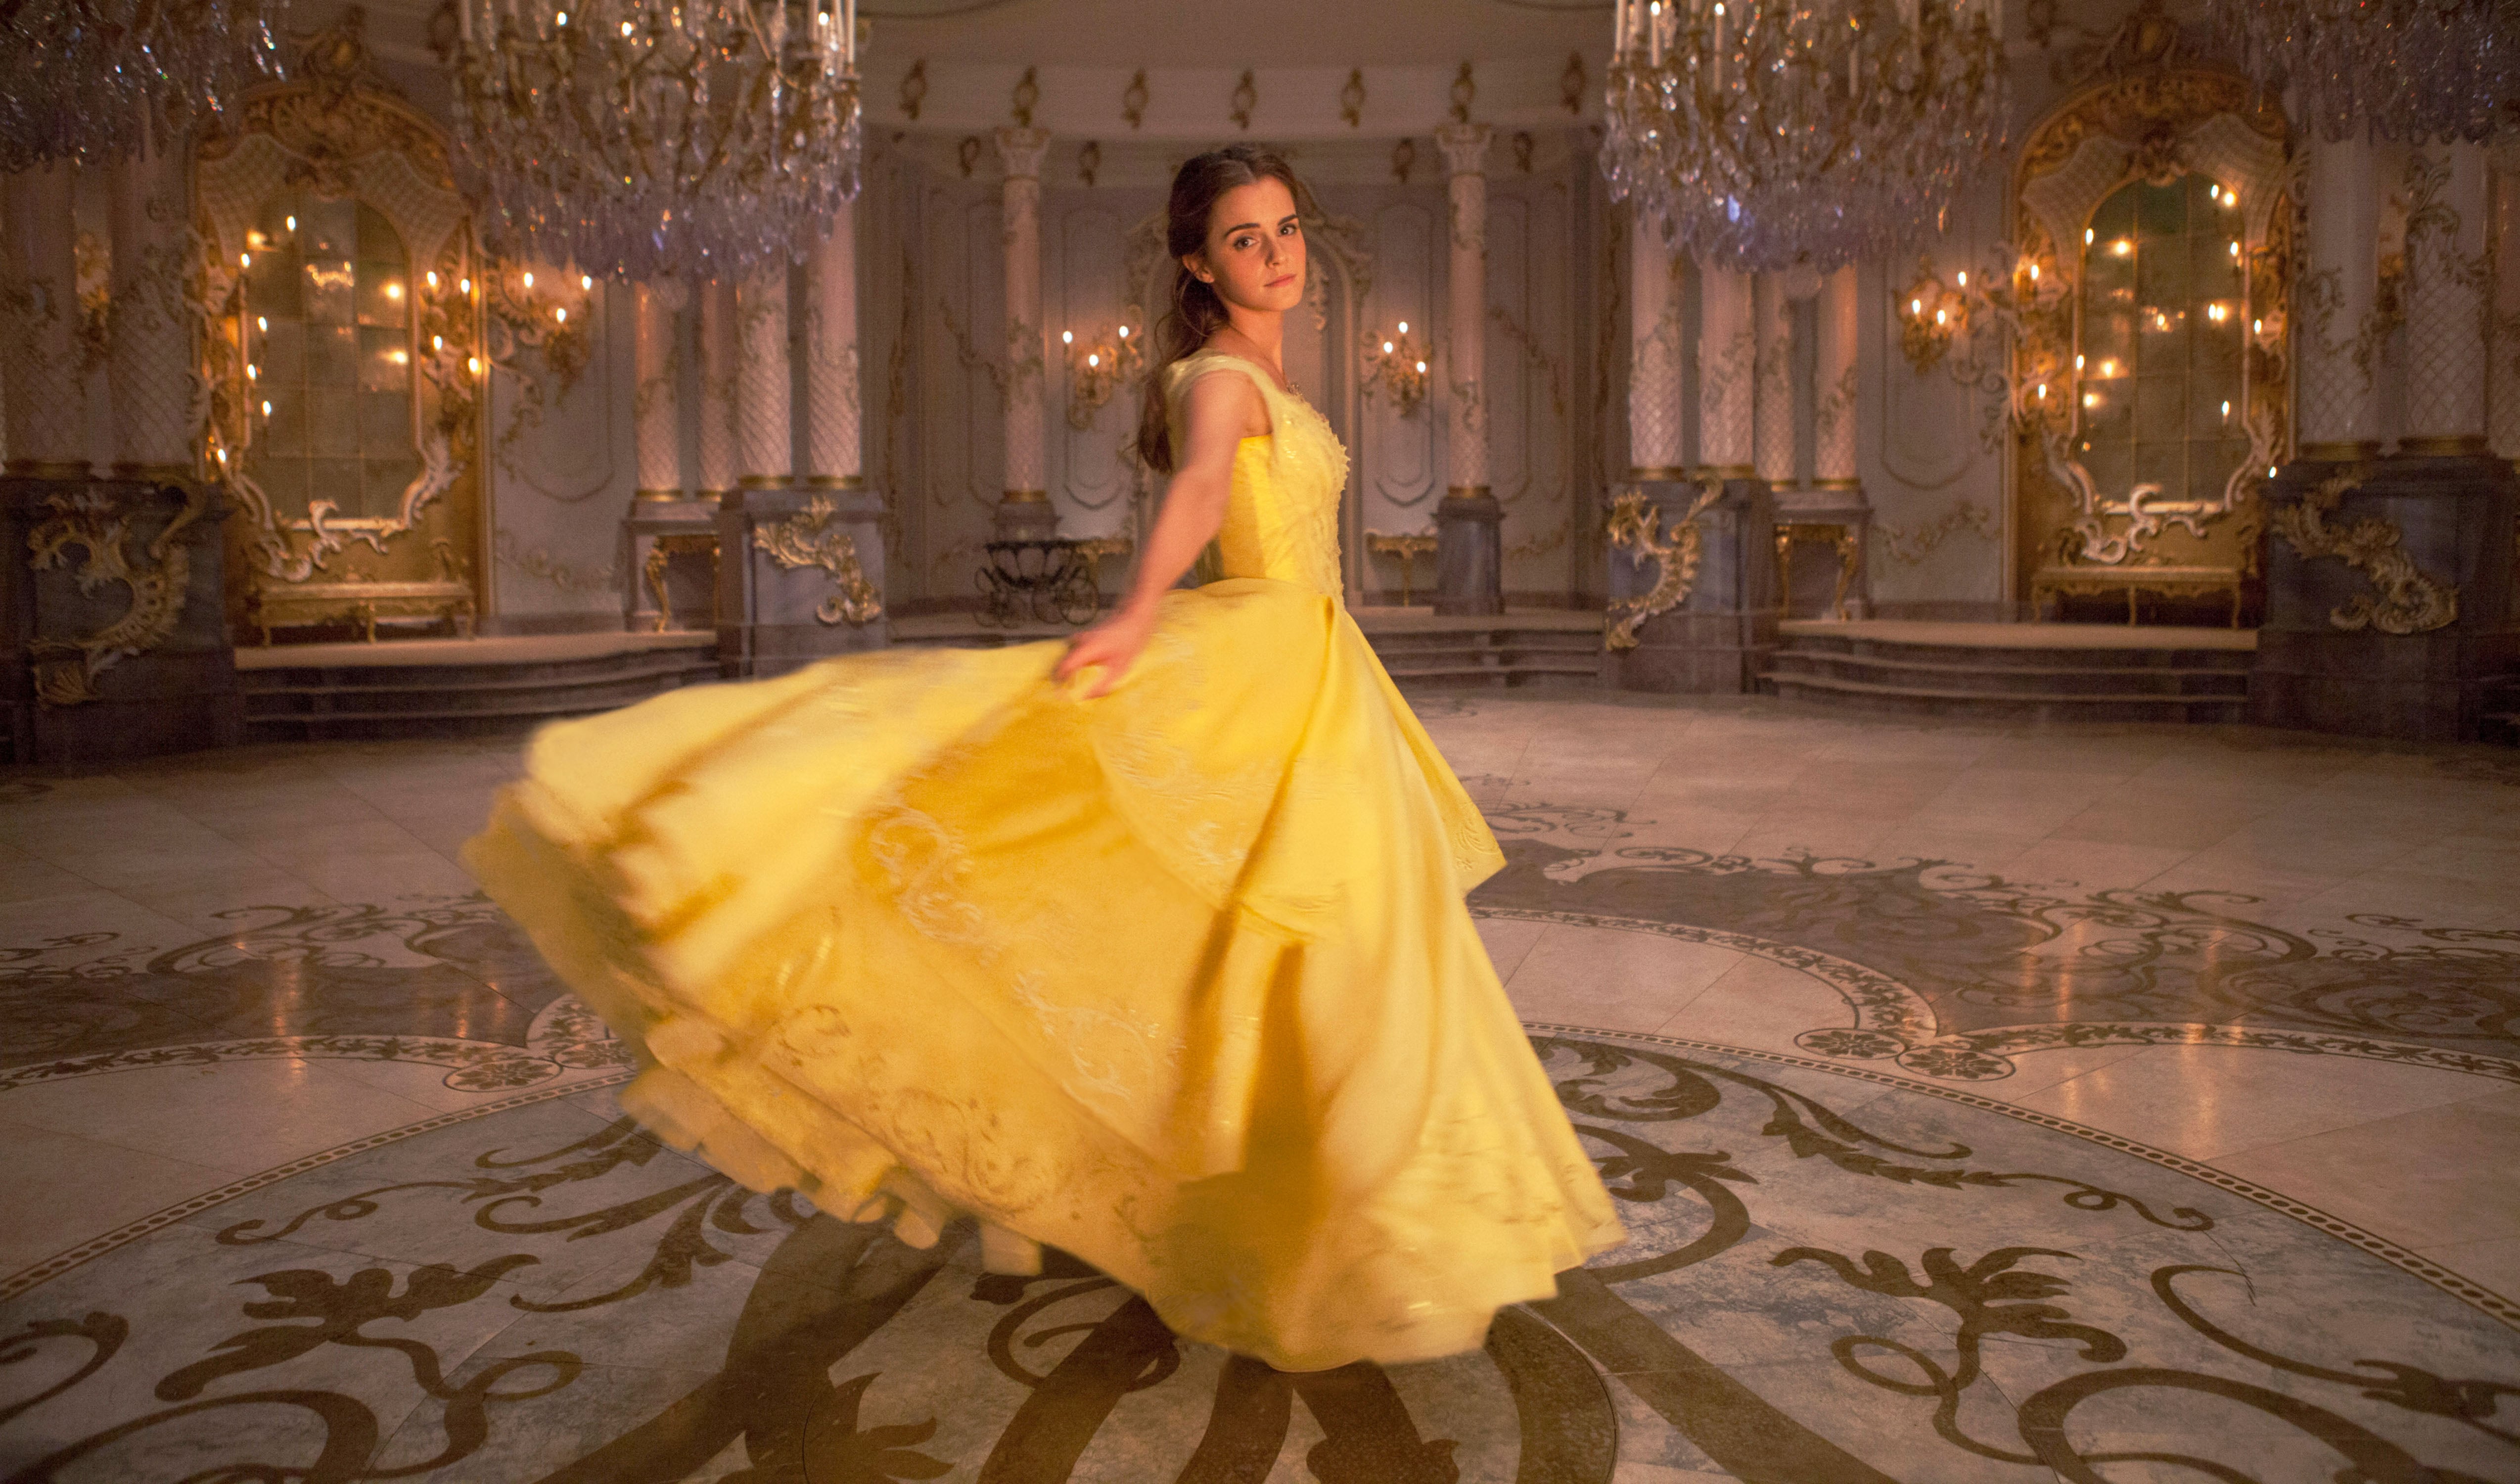 Disney Princesses, Marvel Superheroes—and Our Royal Identity